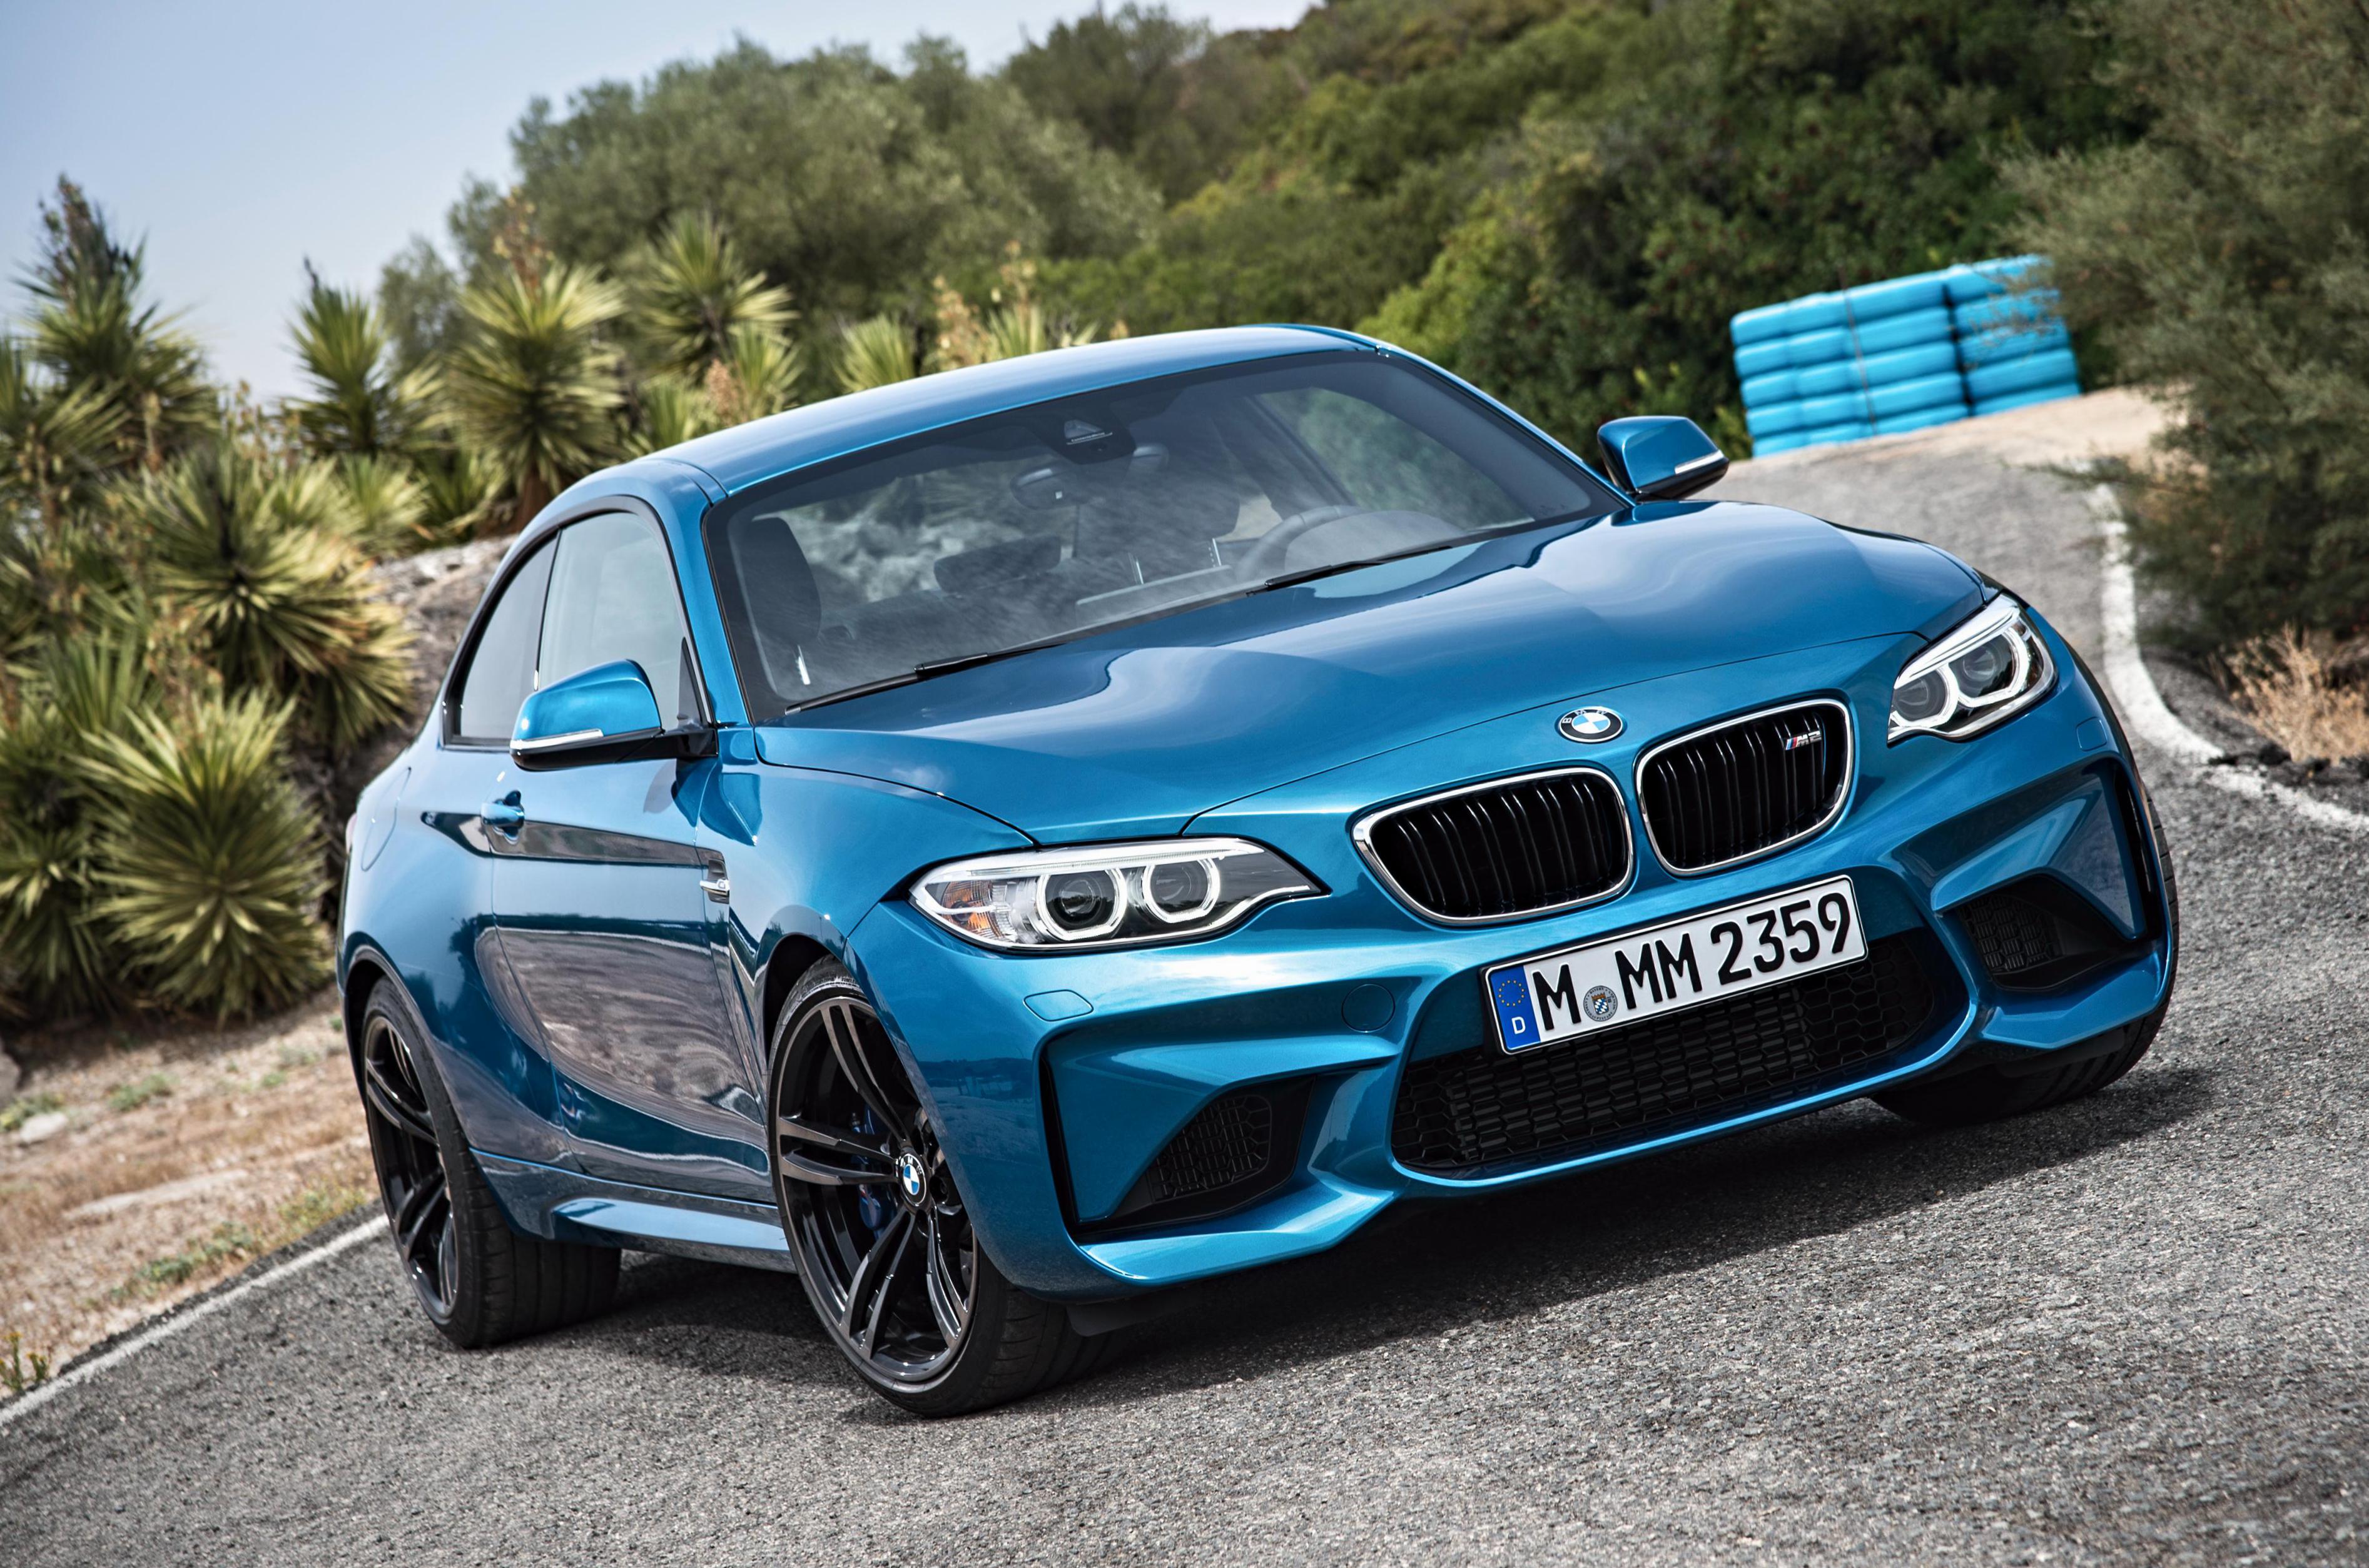 BMW M2 Coupe (F87) Photos and Specs. Photo: BMW M2 Coupe (F87) sale ...